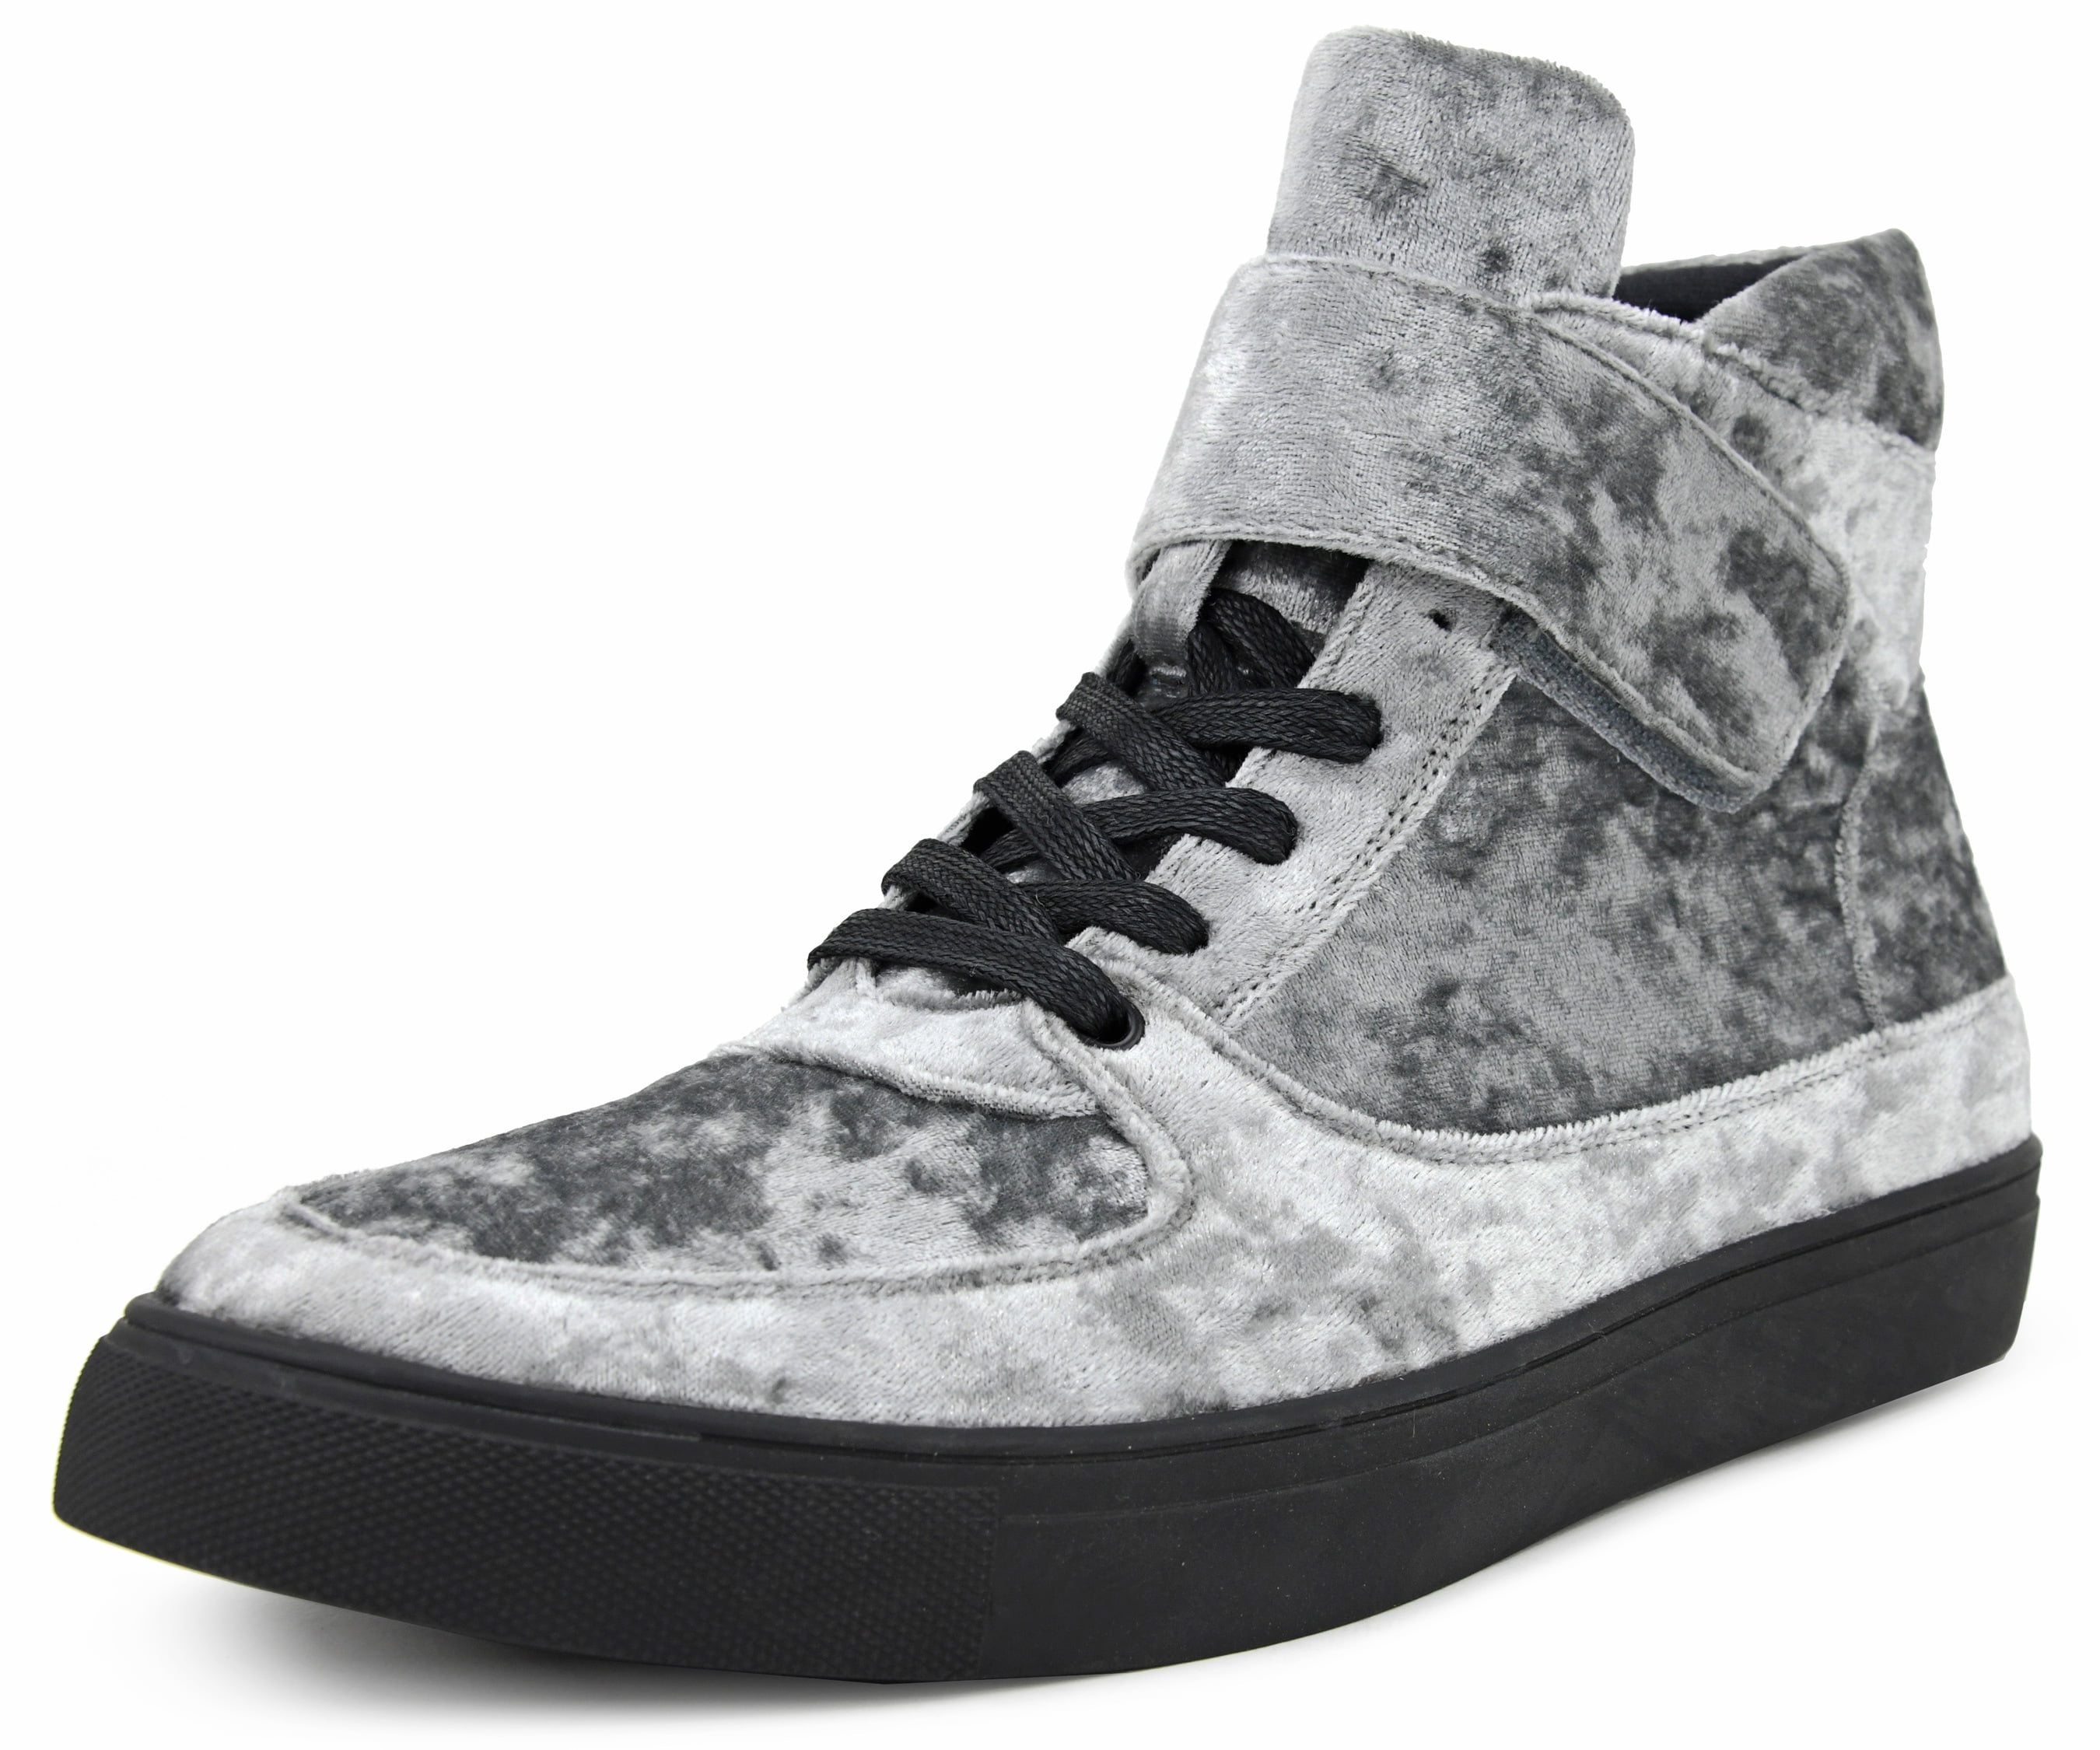 Sio - Sio Mens Crushed Velvet High Top 